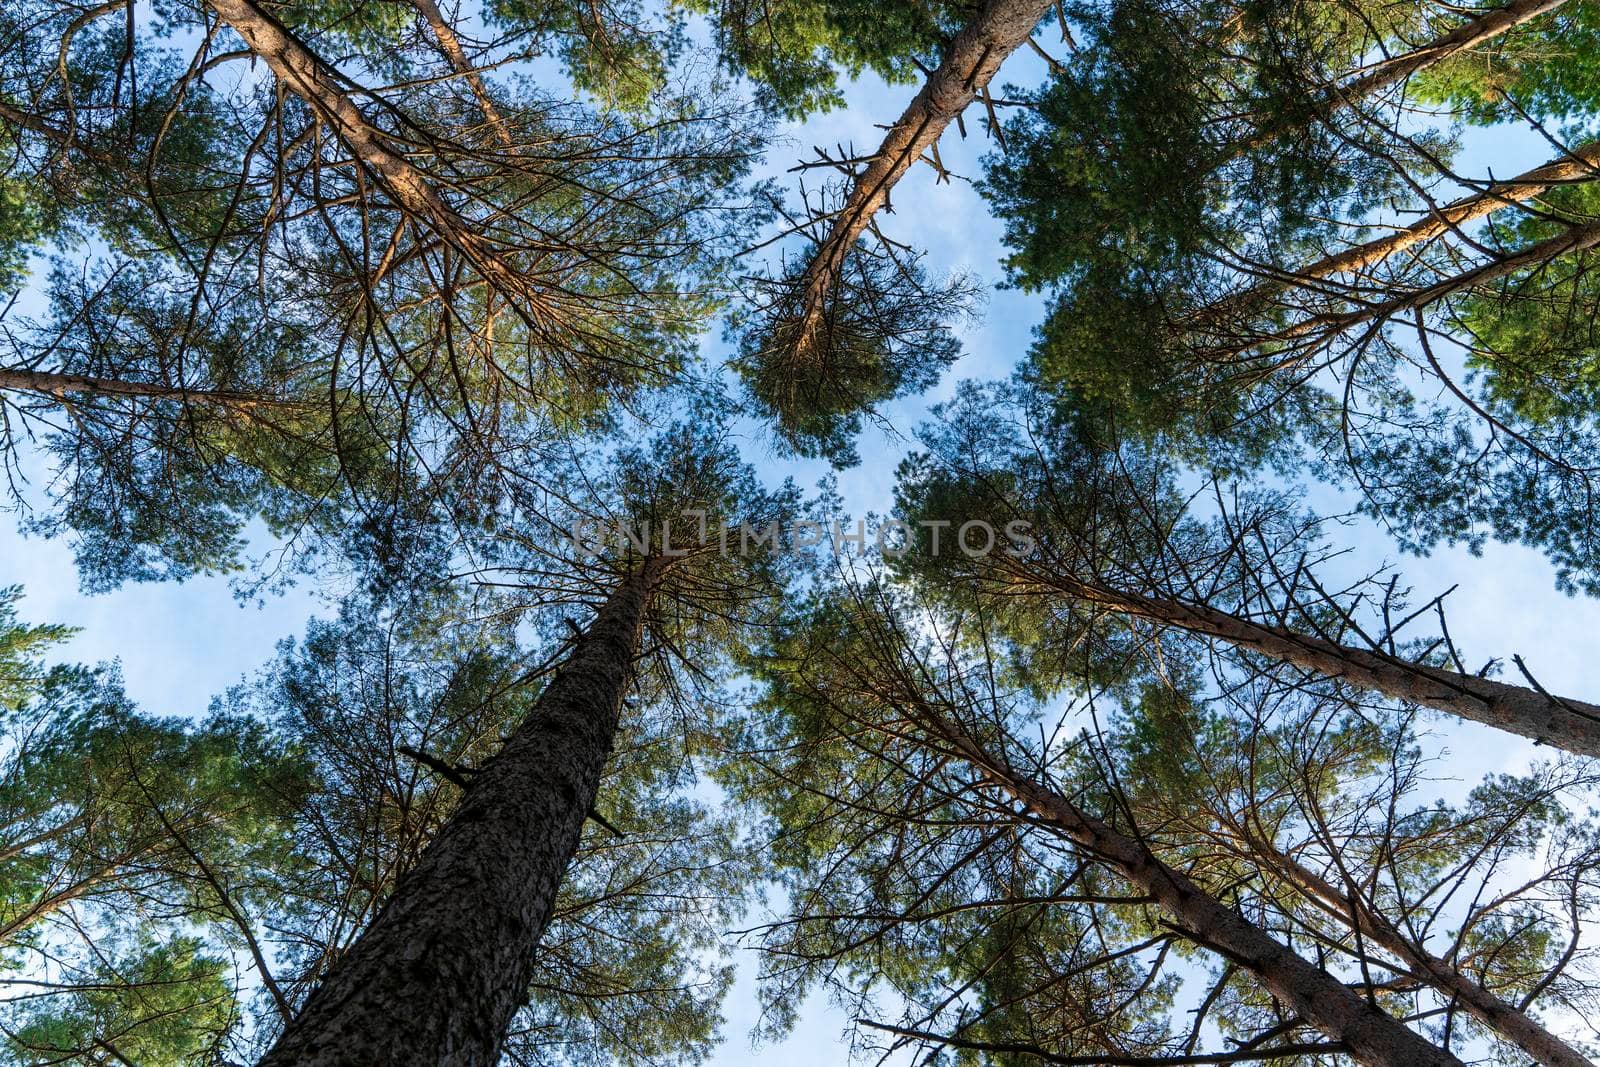 tree trunks go up into the sky in the forest. the tranquility and silence of nature. View of the sky with pine trees going up